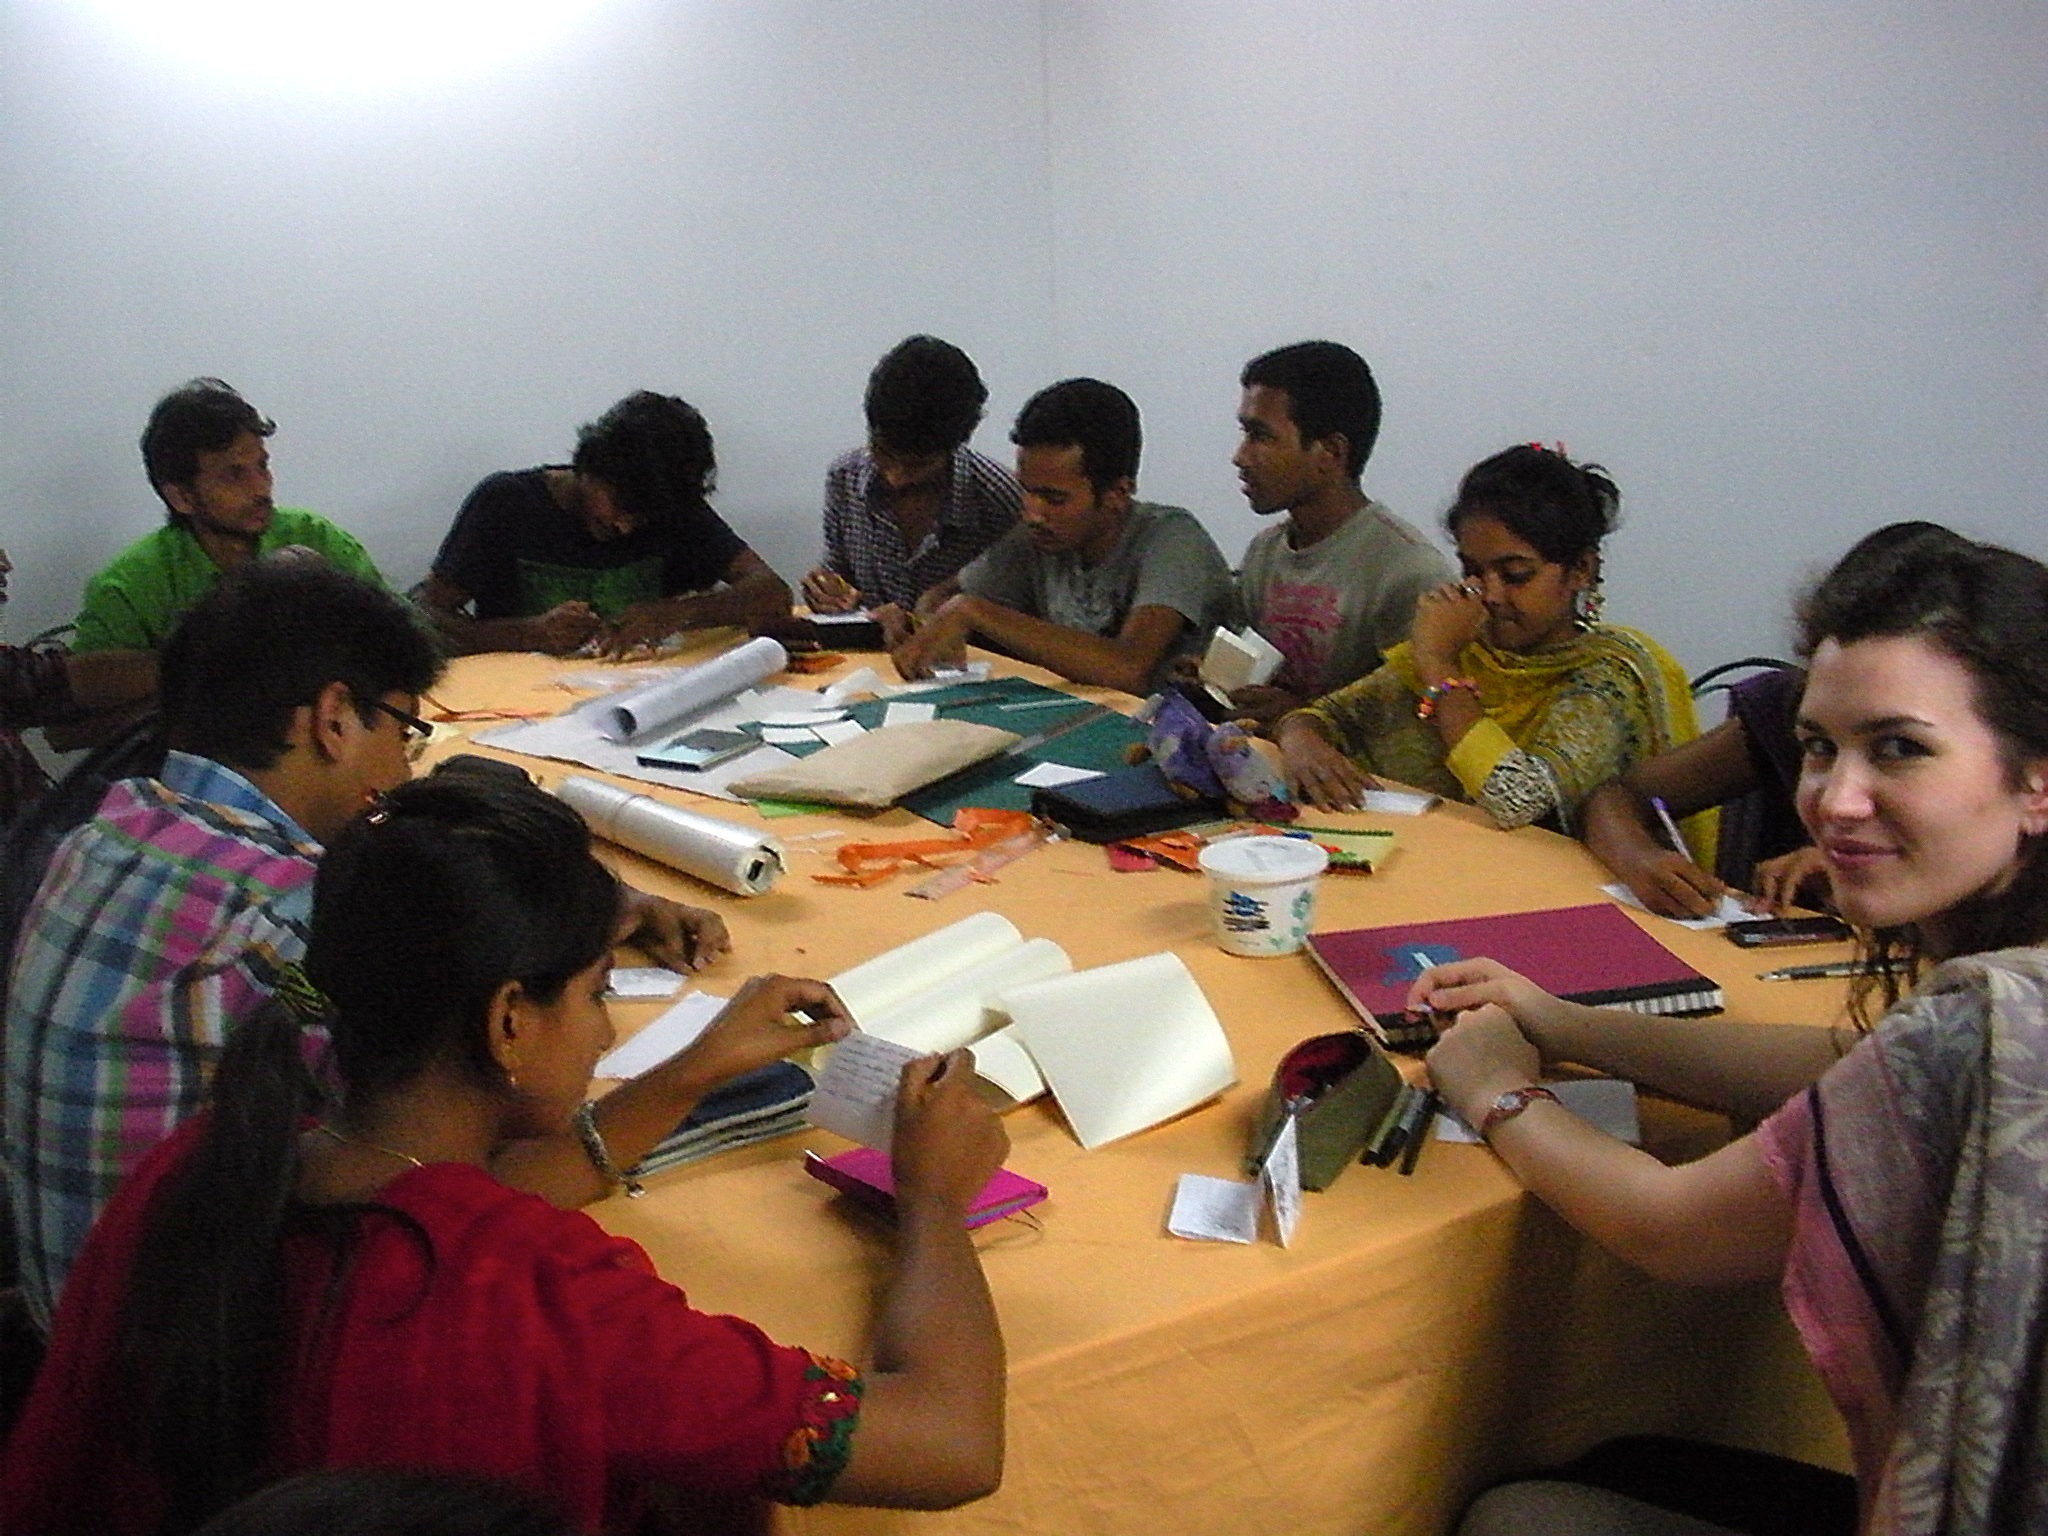 Camille Hawbaker (far right) leading a printmaking workshop in Bangladesh.